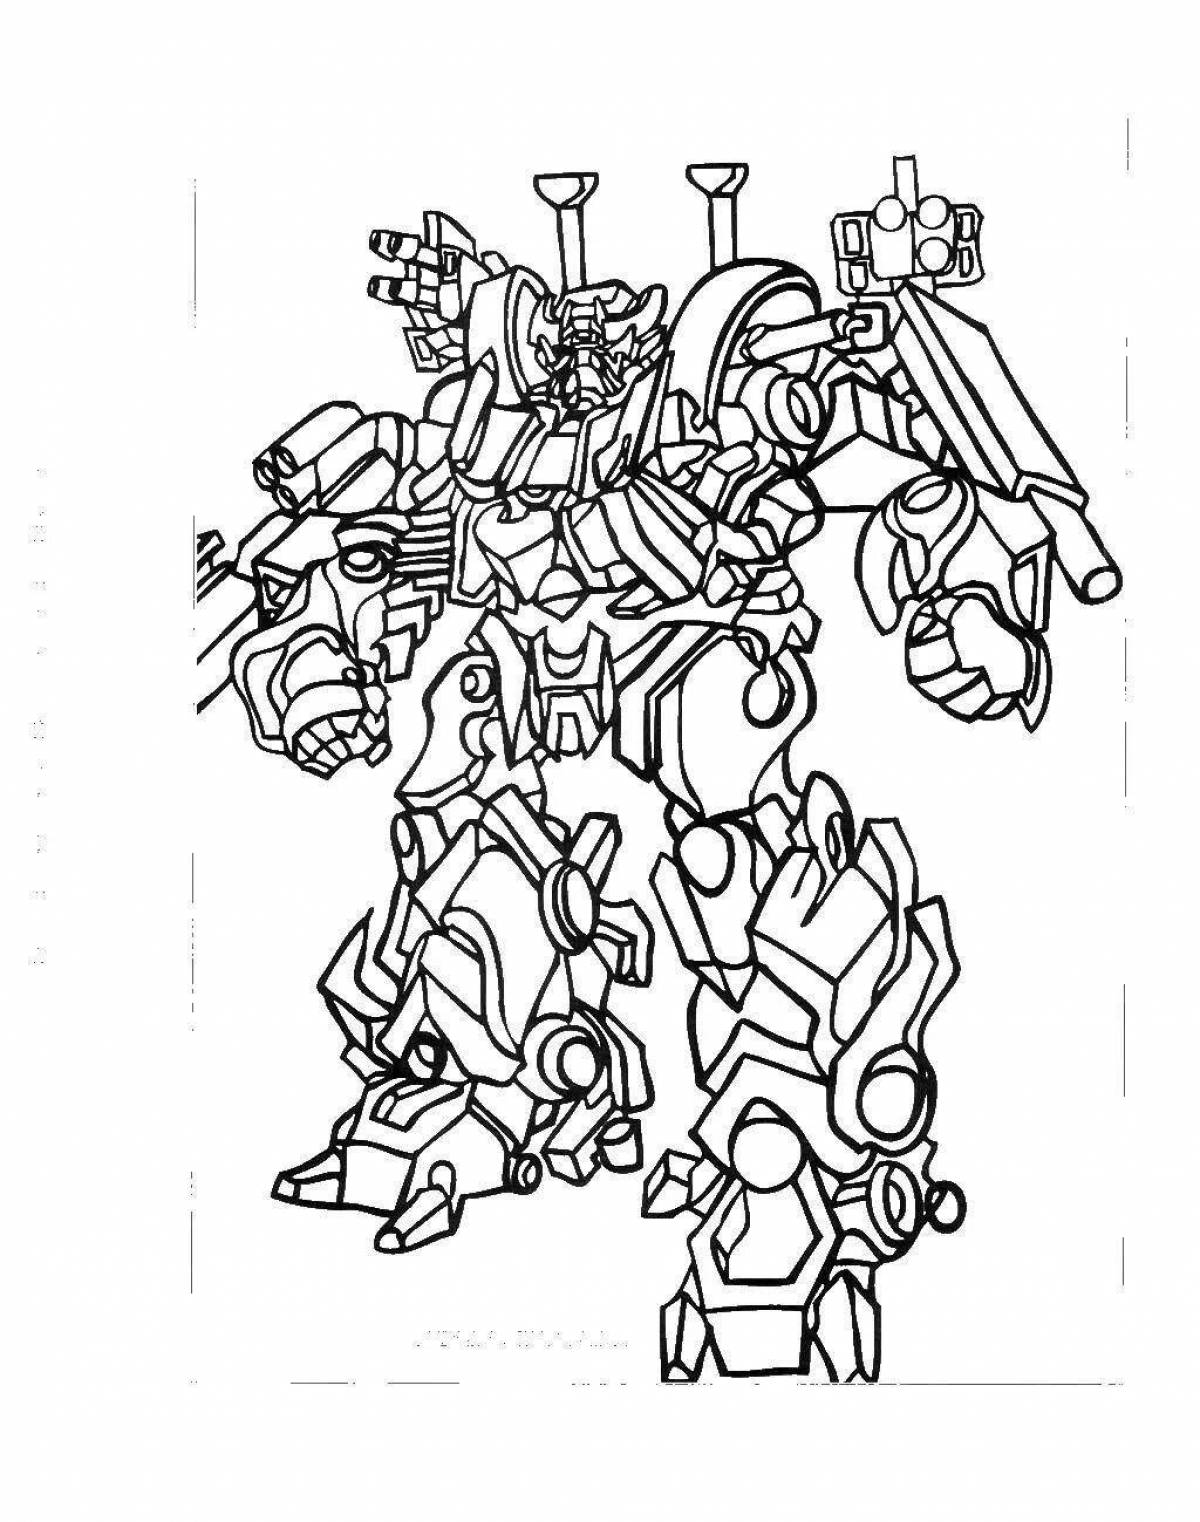 Animated ironhide coloring page